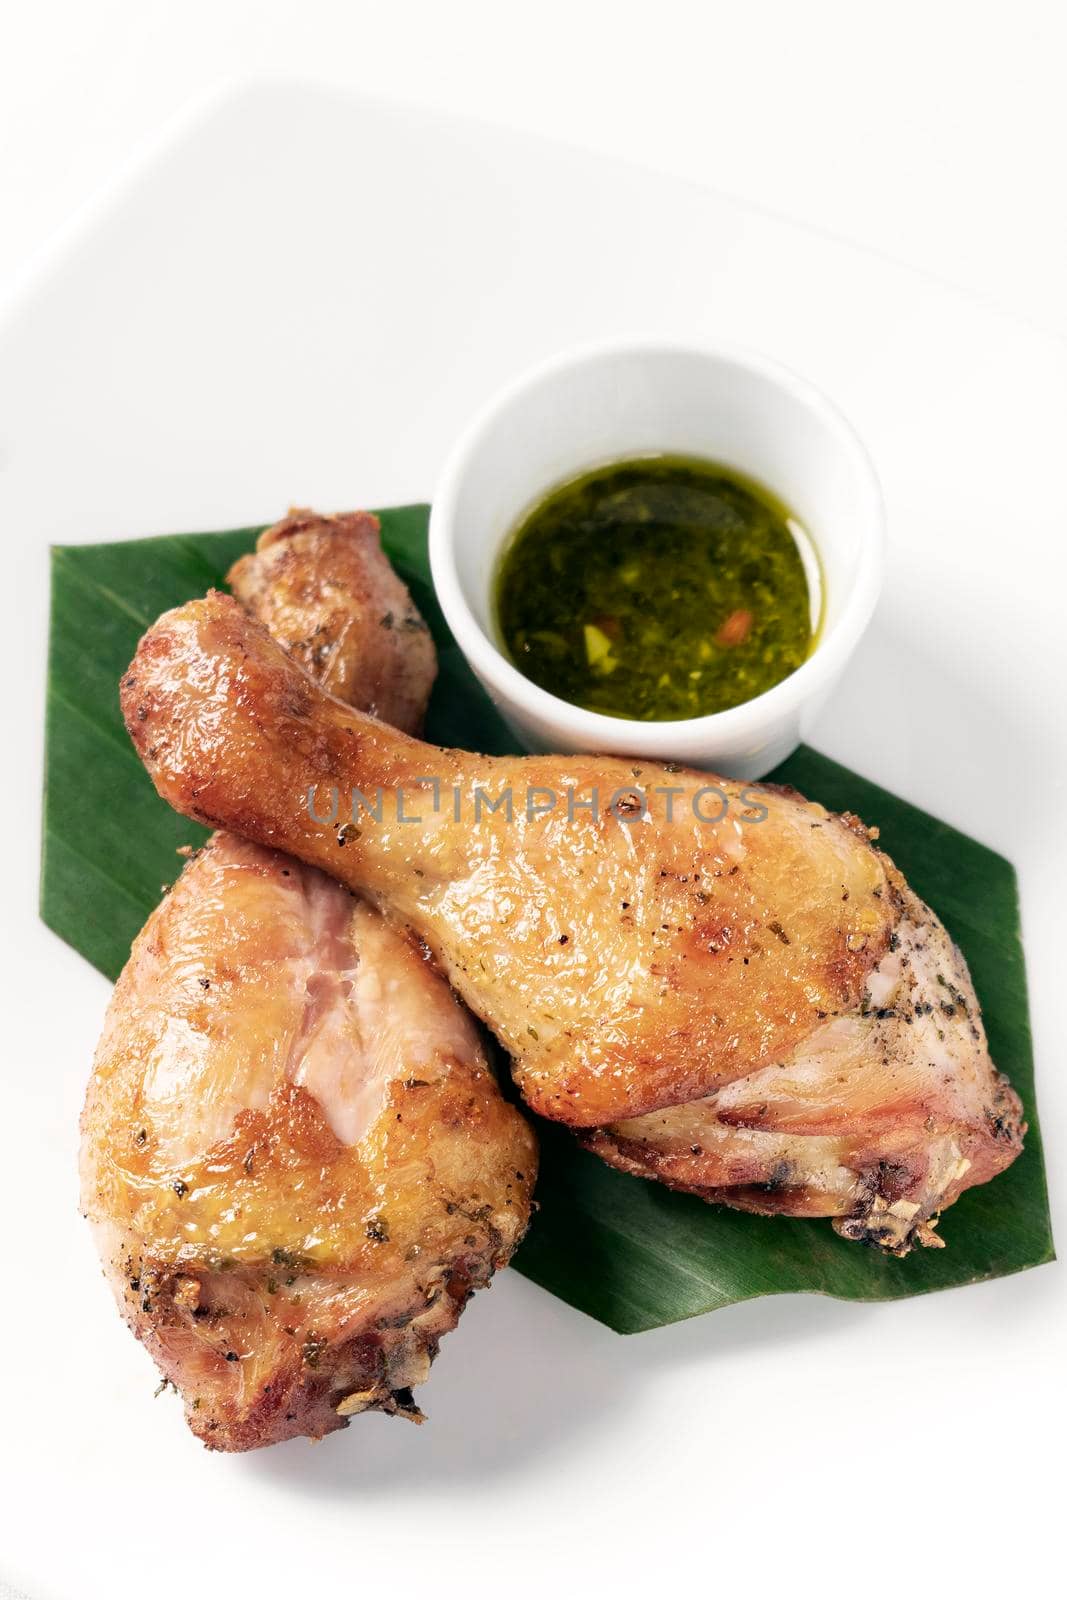 roast chicken drumsticks appetizer with spicy thai green chilli sauce by jackmalipan